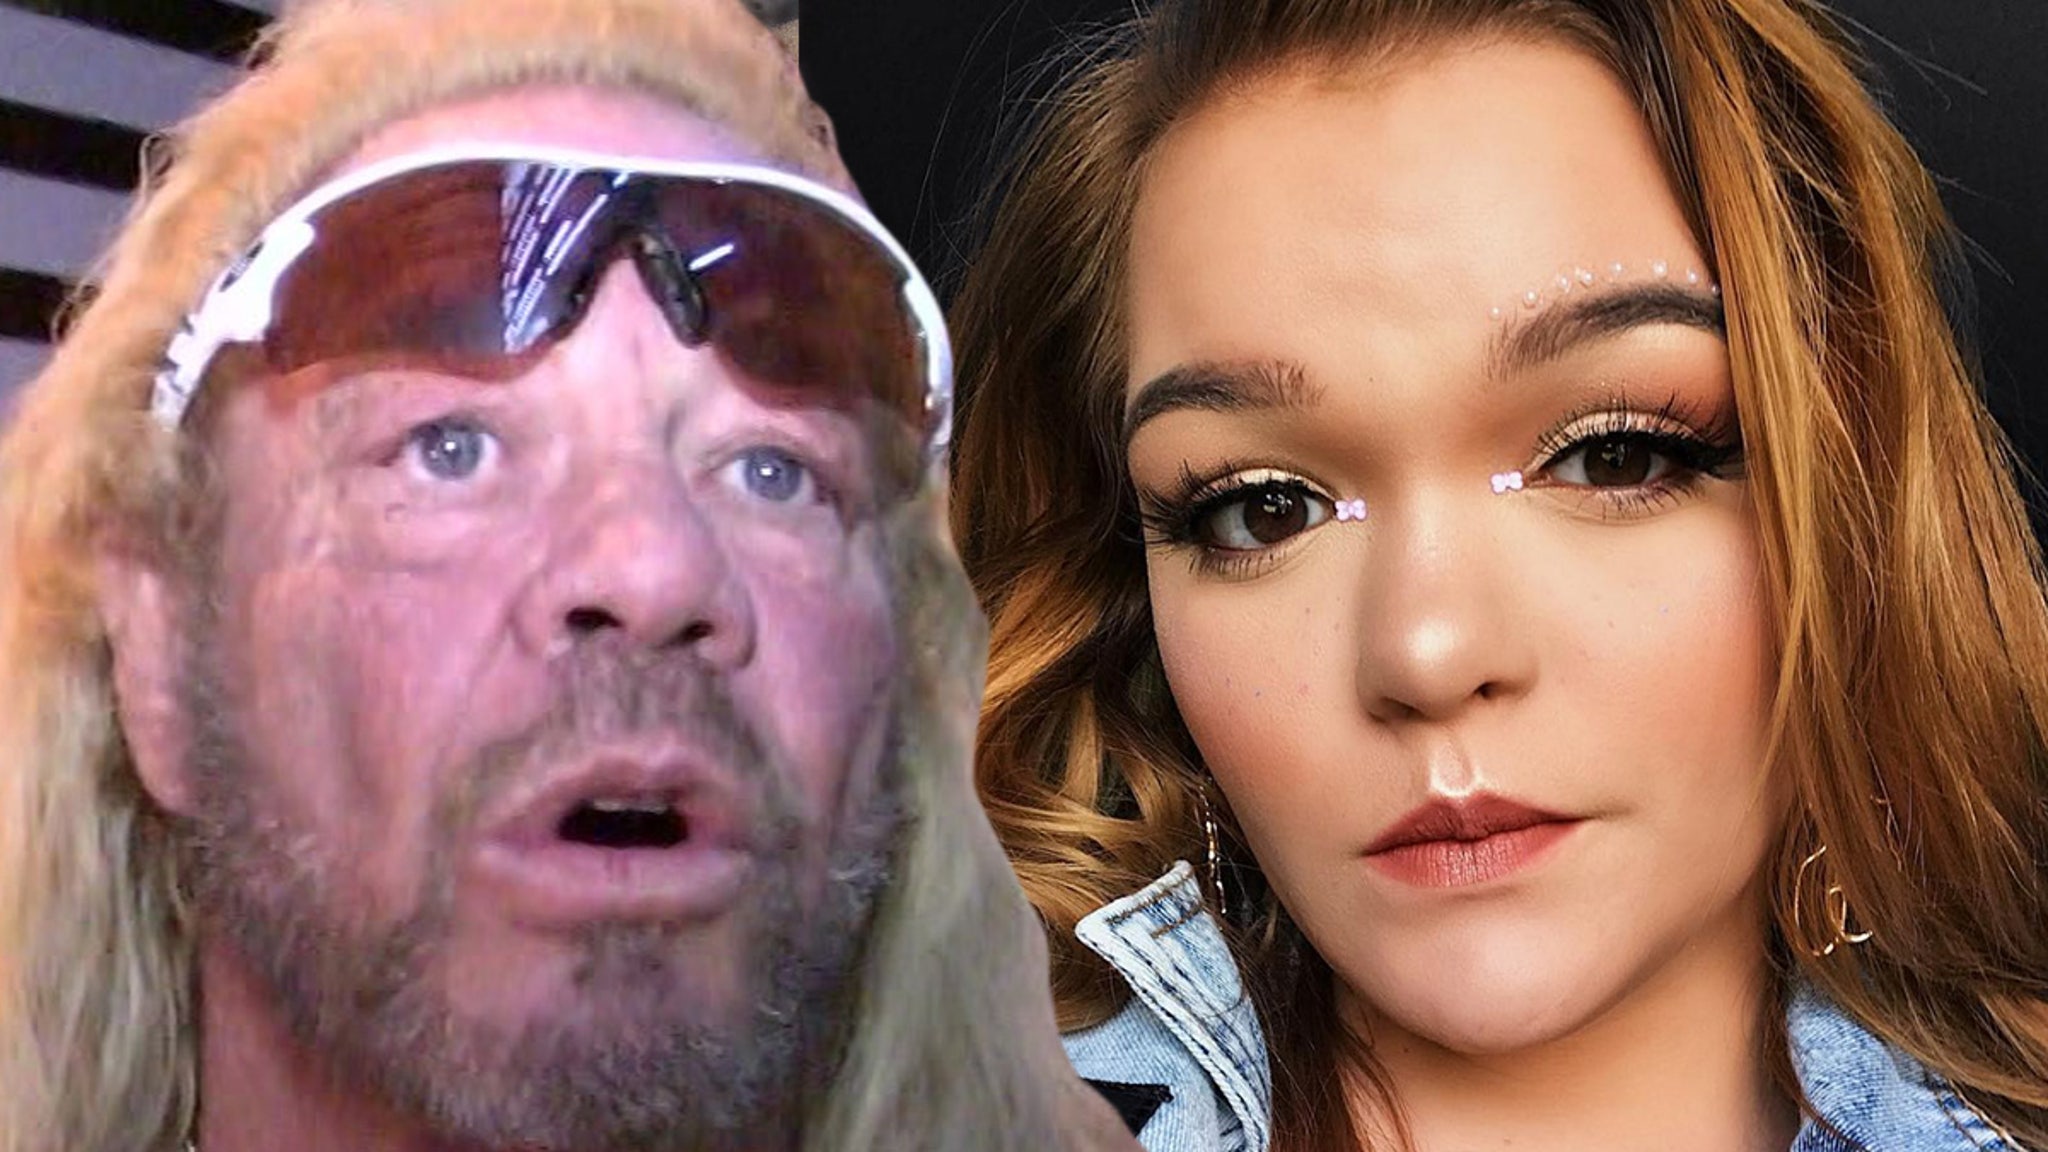 Dog the Bounty Hunter's Daughter Claims Her BLM Support Created Rift